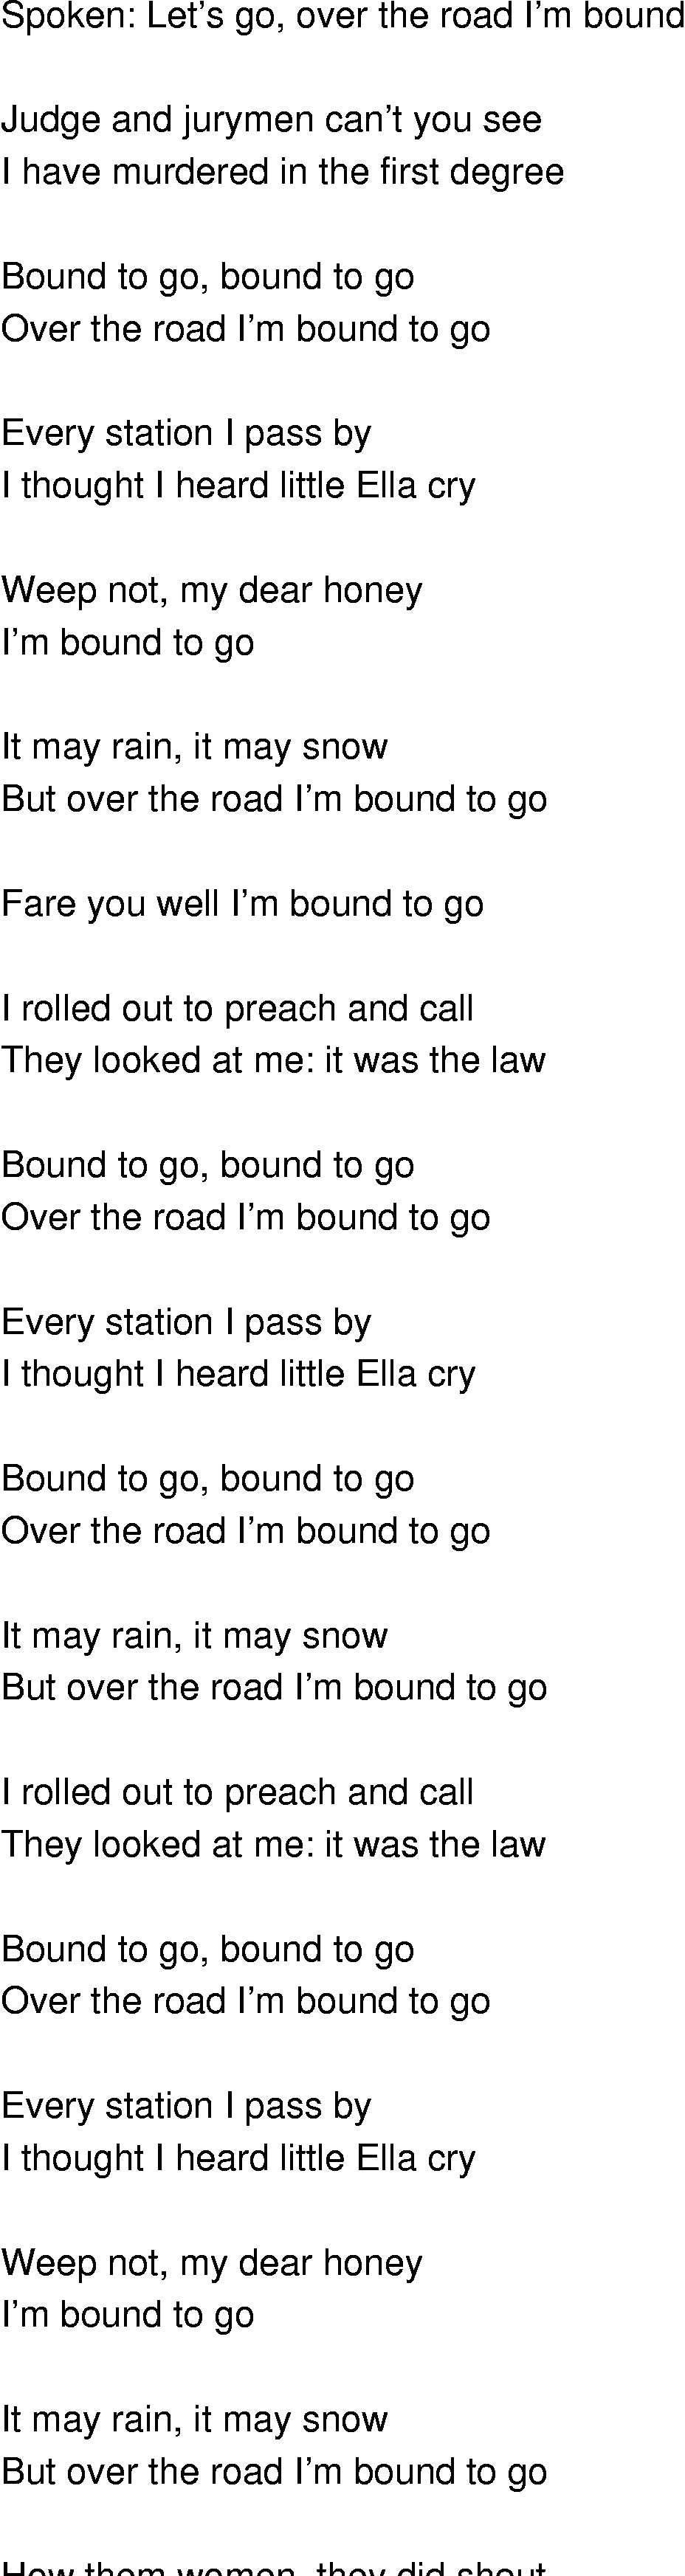 Old-Time (oldtimey) Song Lyrics - over the road im bound to go